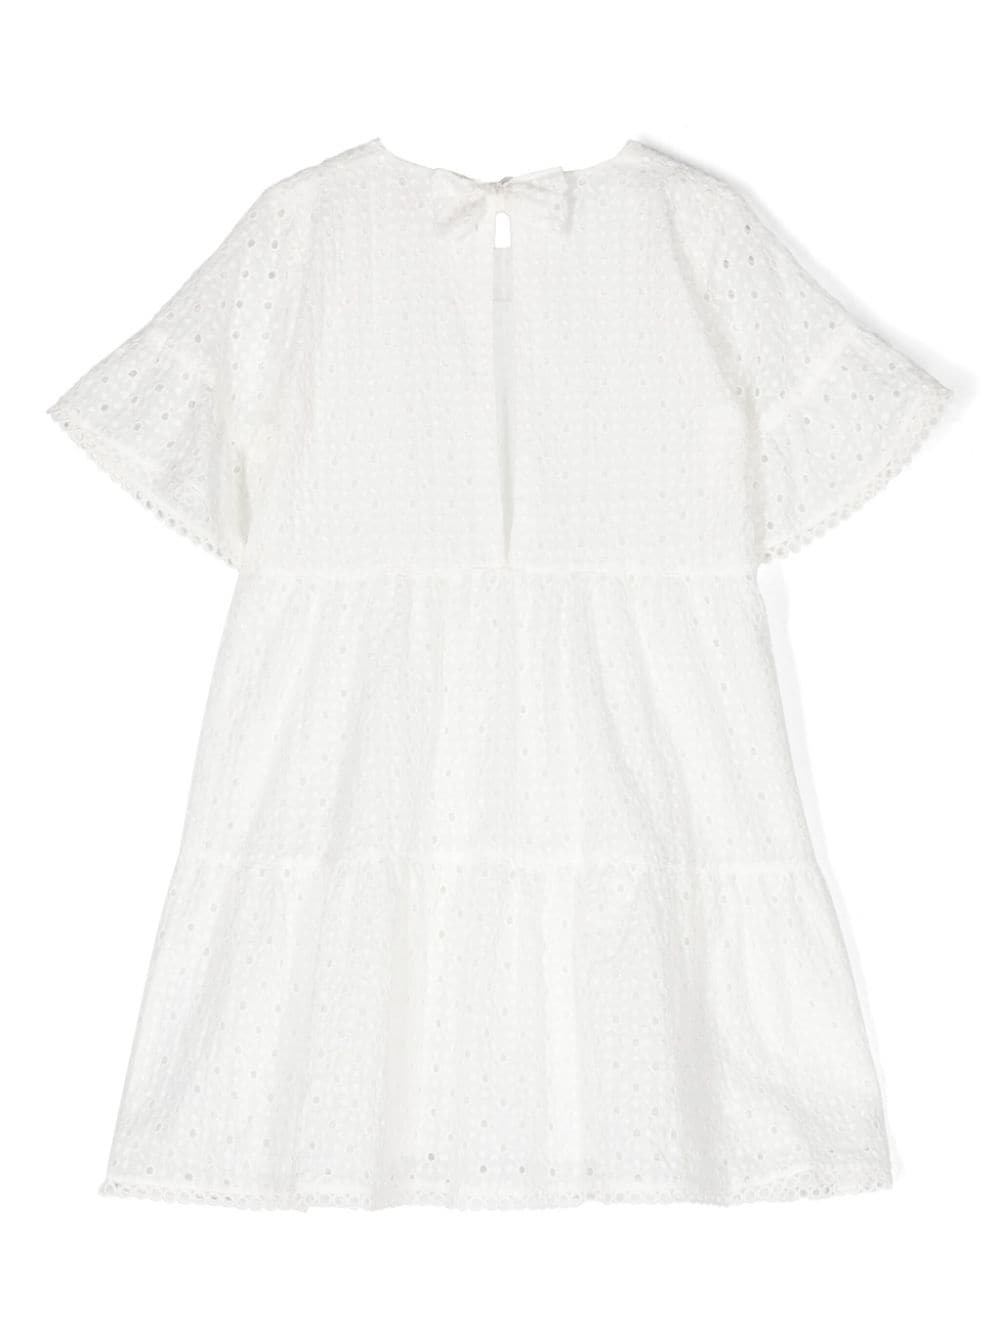 White lace dress for girls